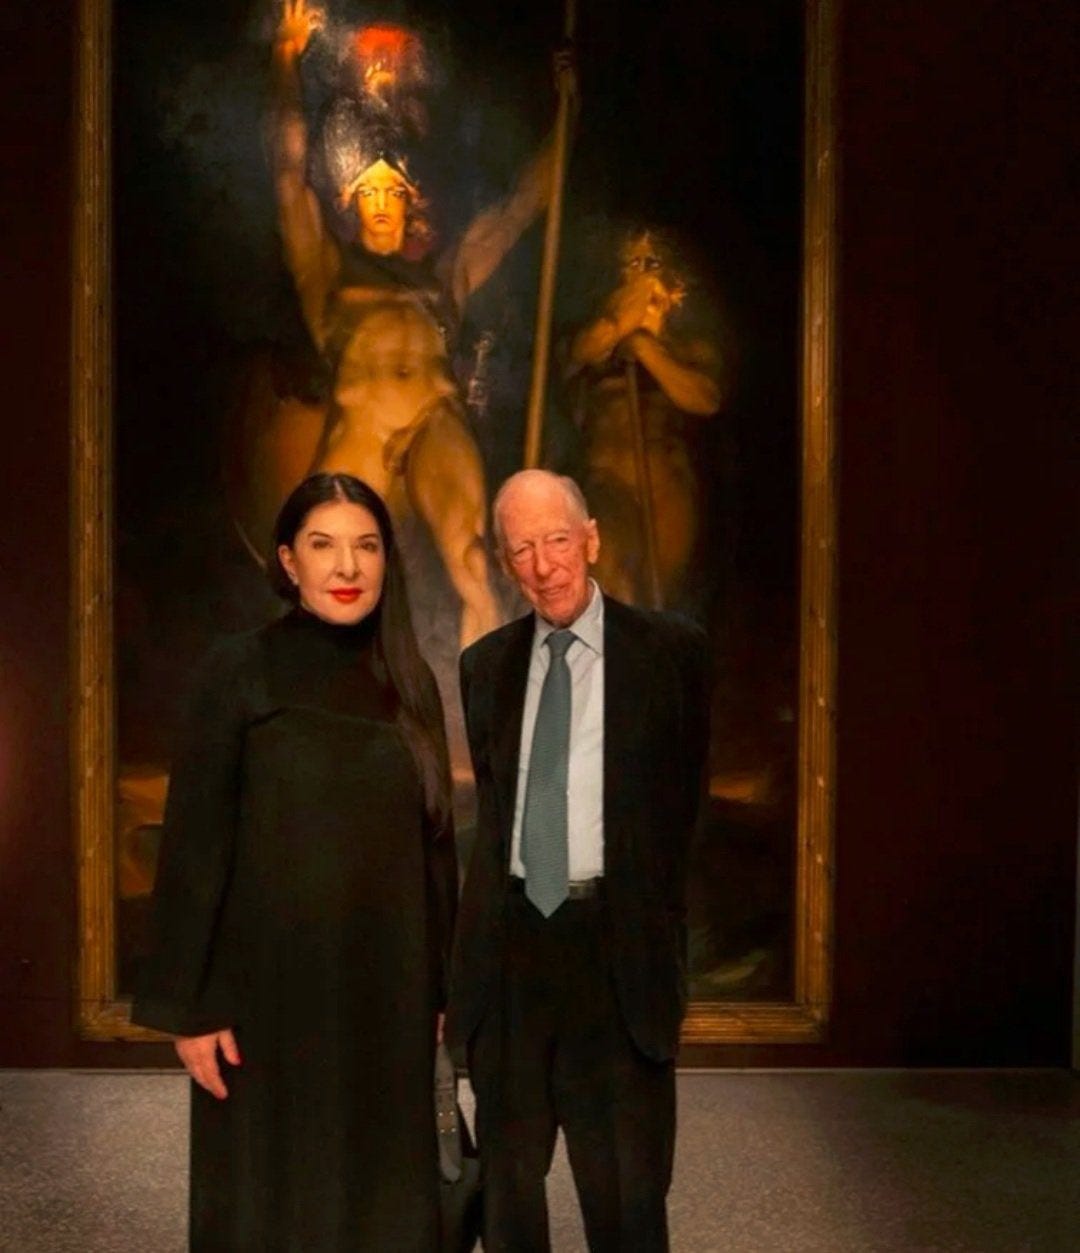 Oli London on Twitter: "True evil exists in this world. Marina Abramovic  with Jacob Rothschild standing in front of the painting “Satan Summoning  His Legions”. Marina is an artist specialising in Human